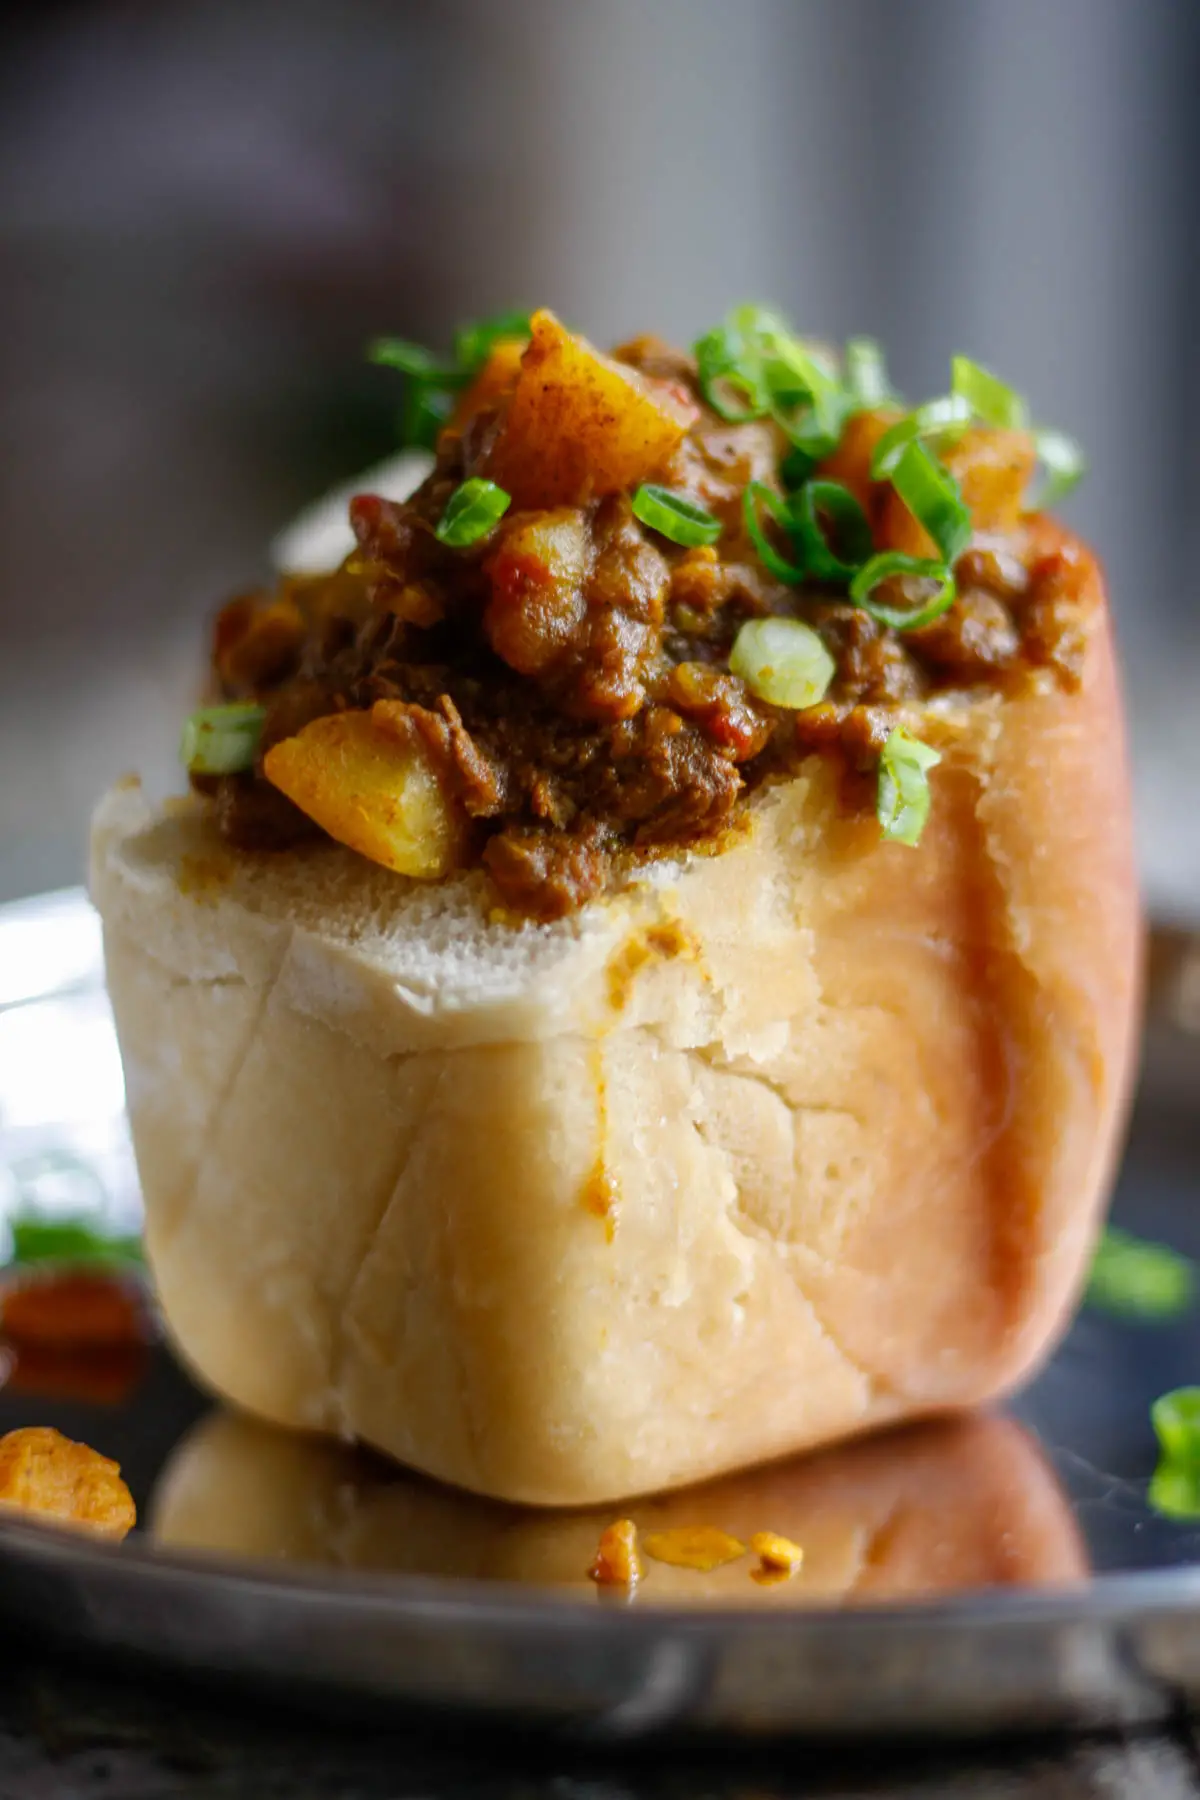 Lamb curry with potatoes inside a hollowed out piece of white bread with green onions as garnish